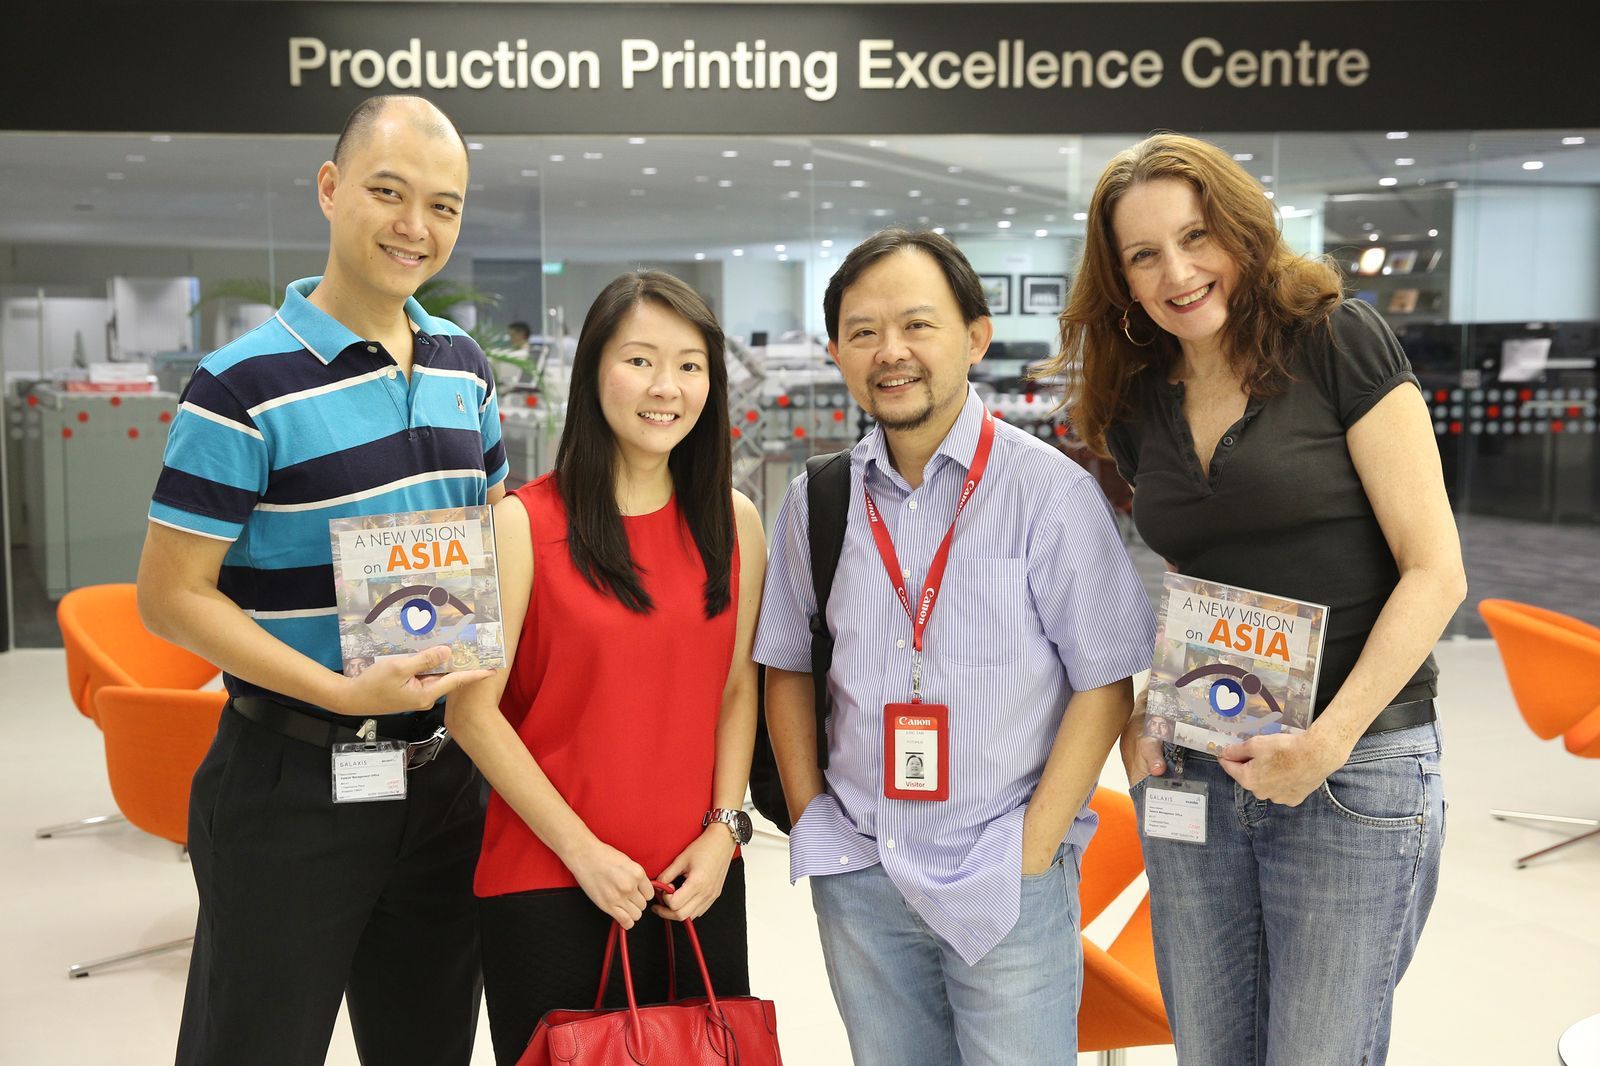 Irving Neil Kwok, Joey Ng, Eric Tan and Carolyn Strover